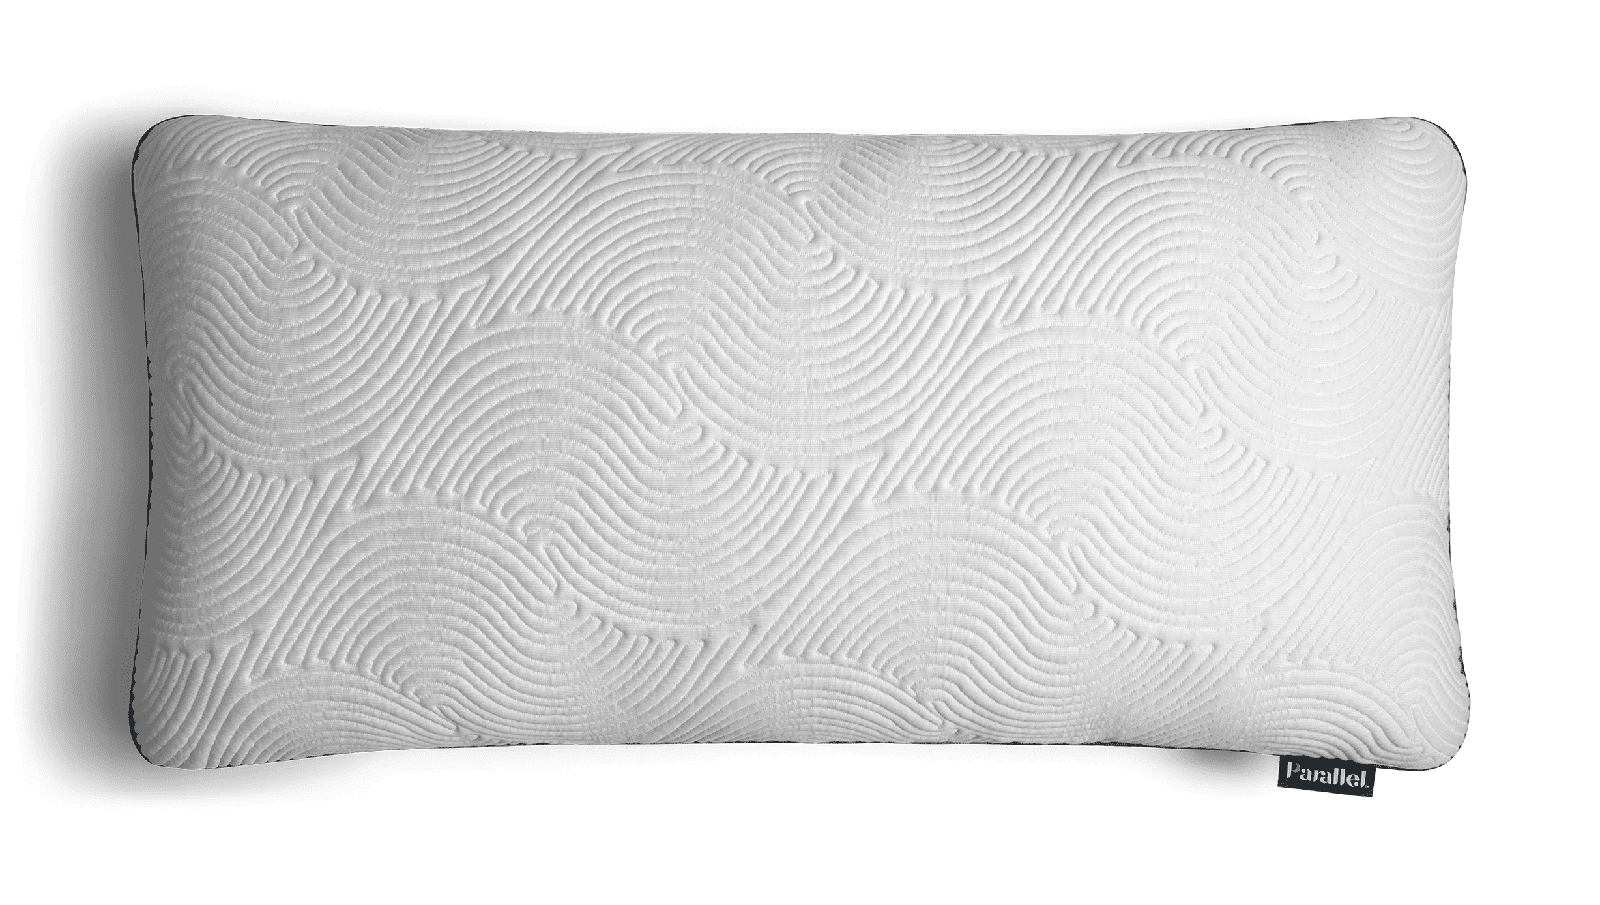 Low Profile King Size Parallel Pillow front top view